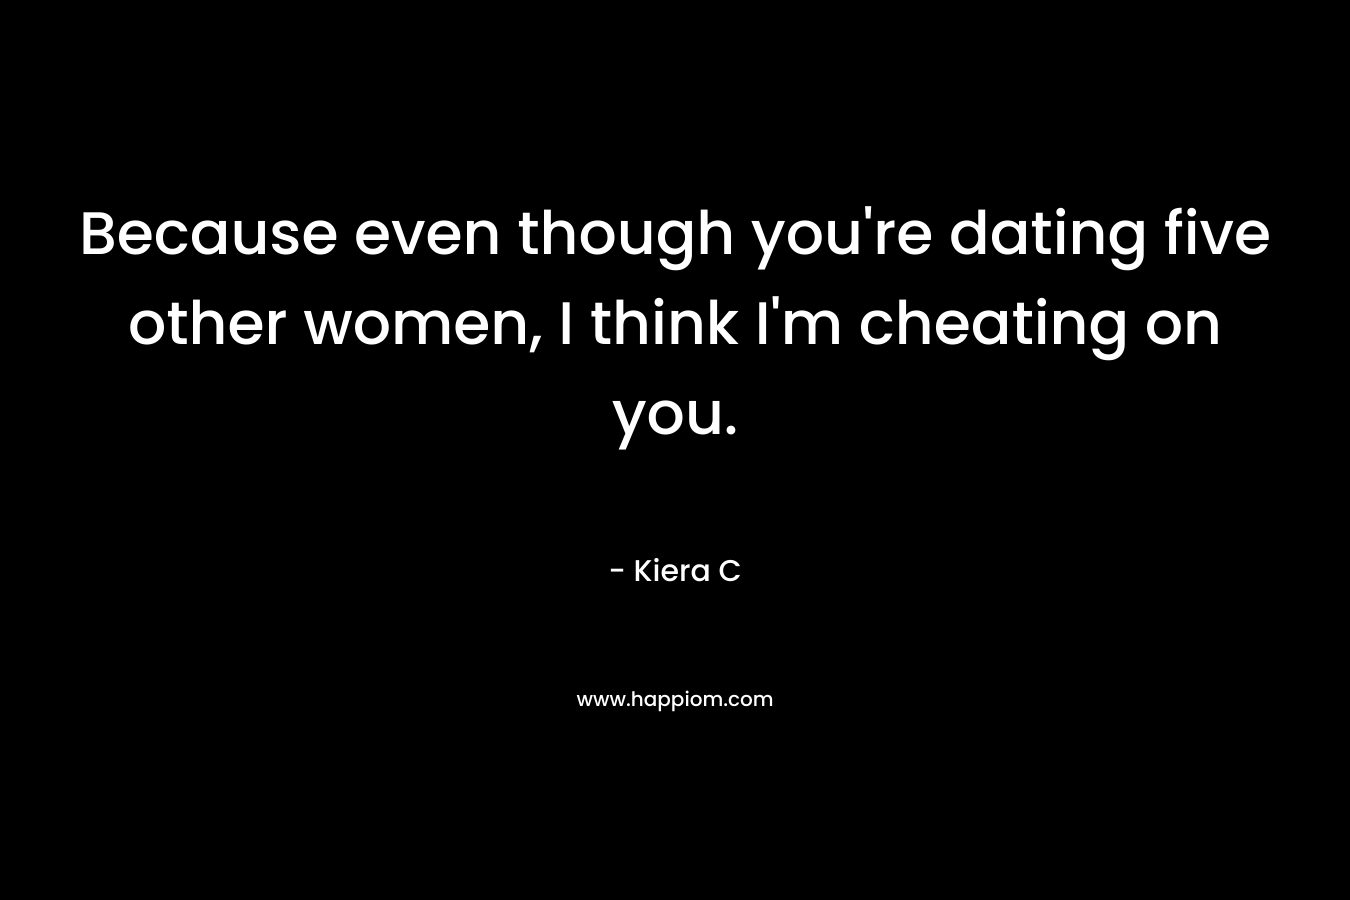 Because even though you’re dating five other women, I think I’m cheating on you. – Kiera C